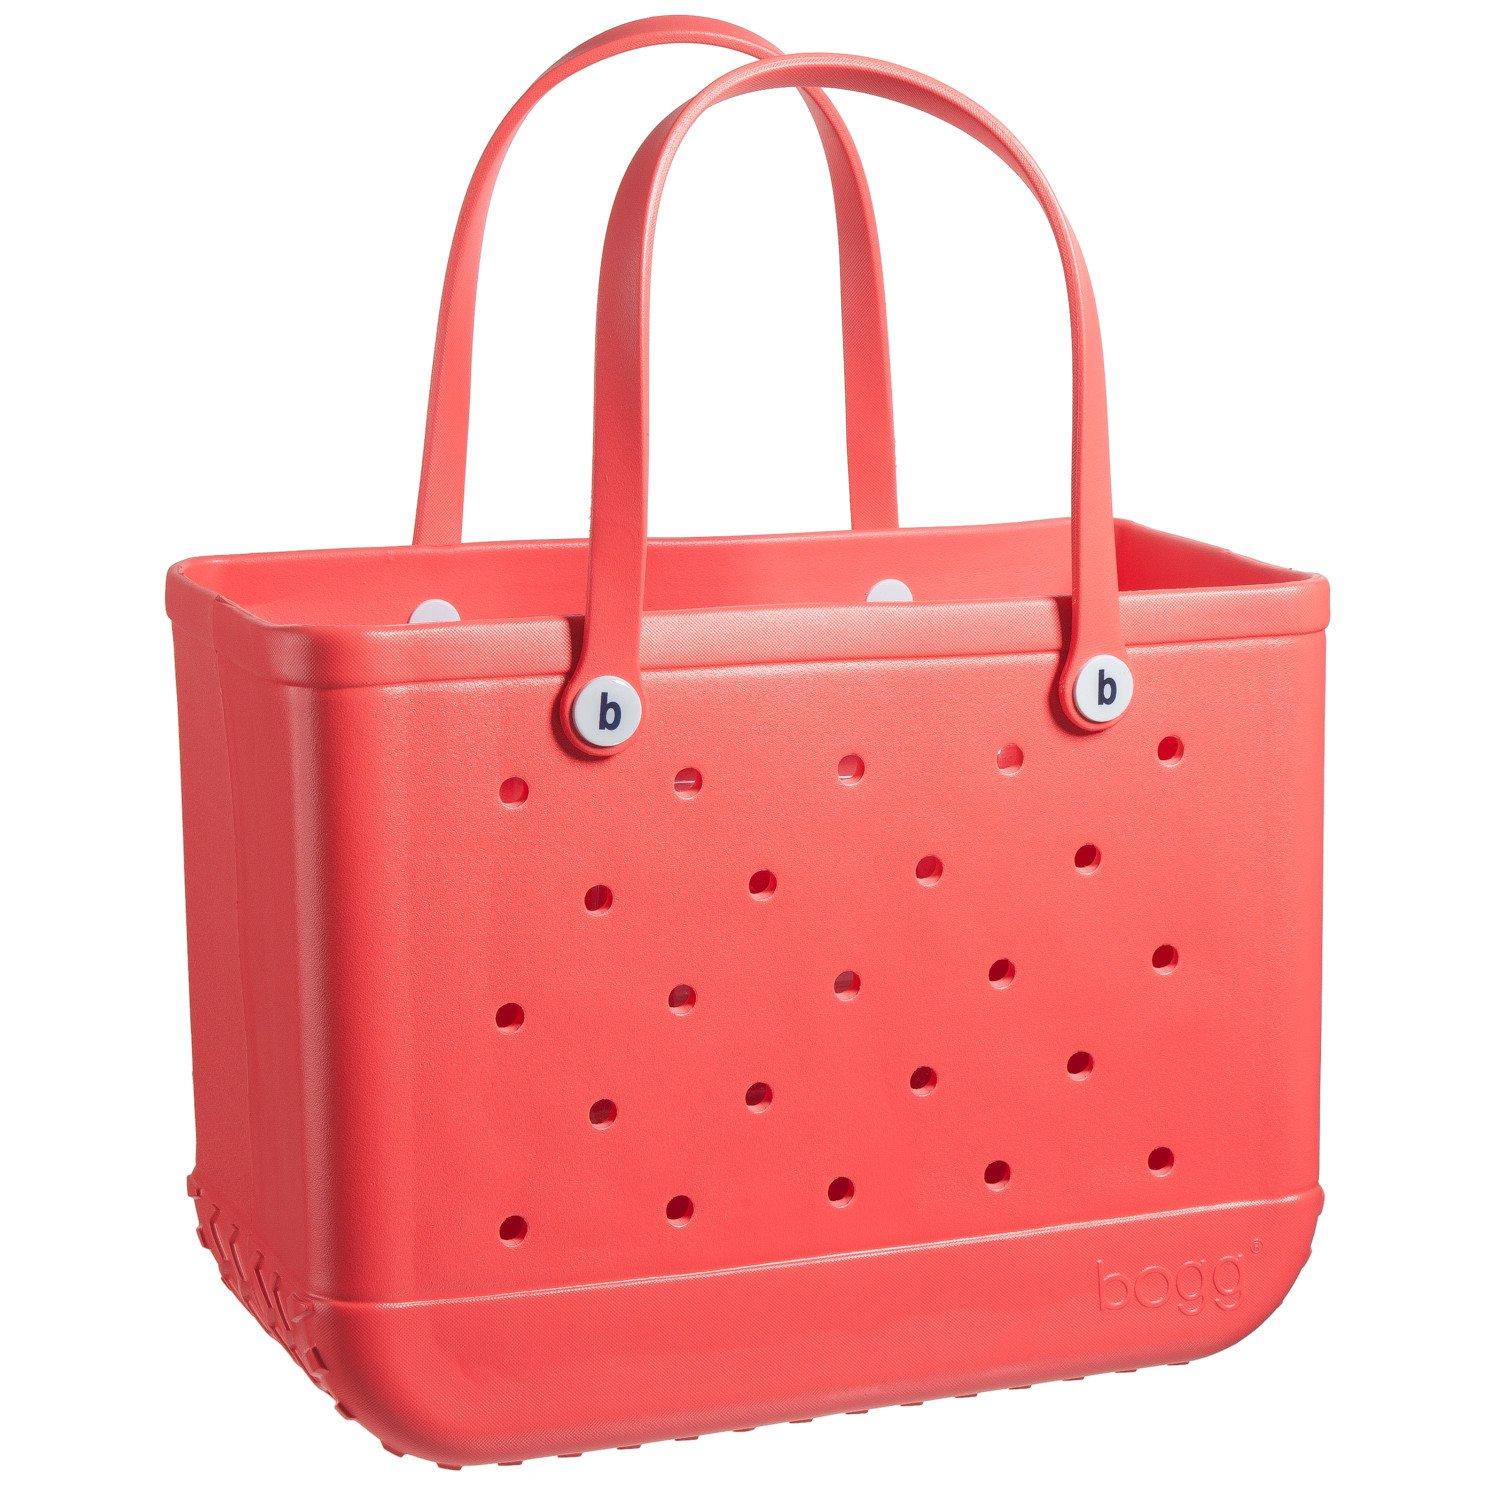 Cacharel Tote Beige Red Pink Women Bag Large